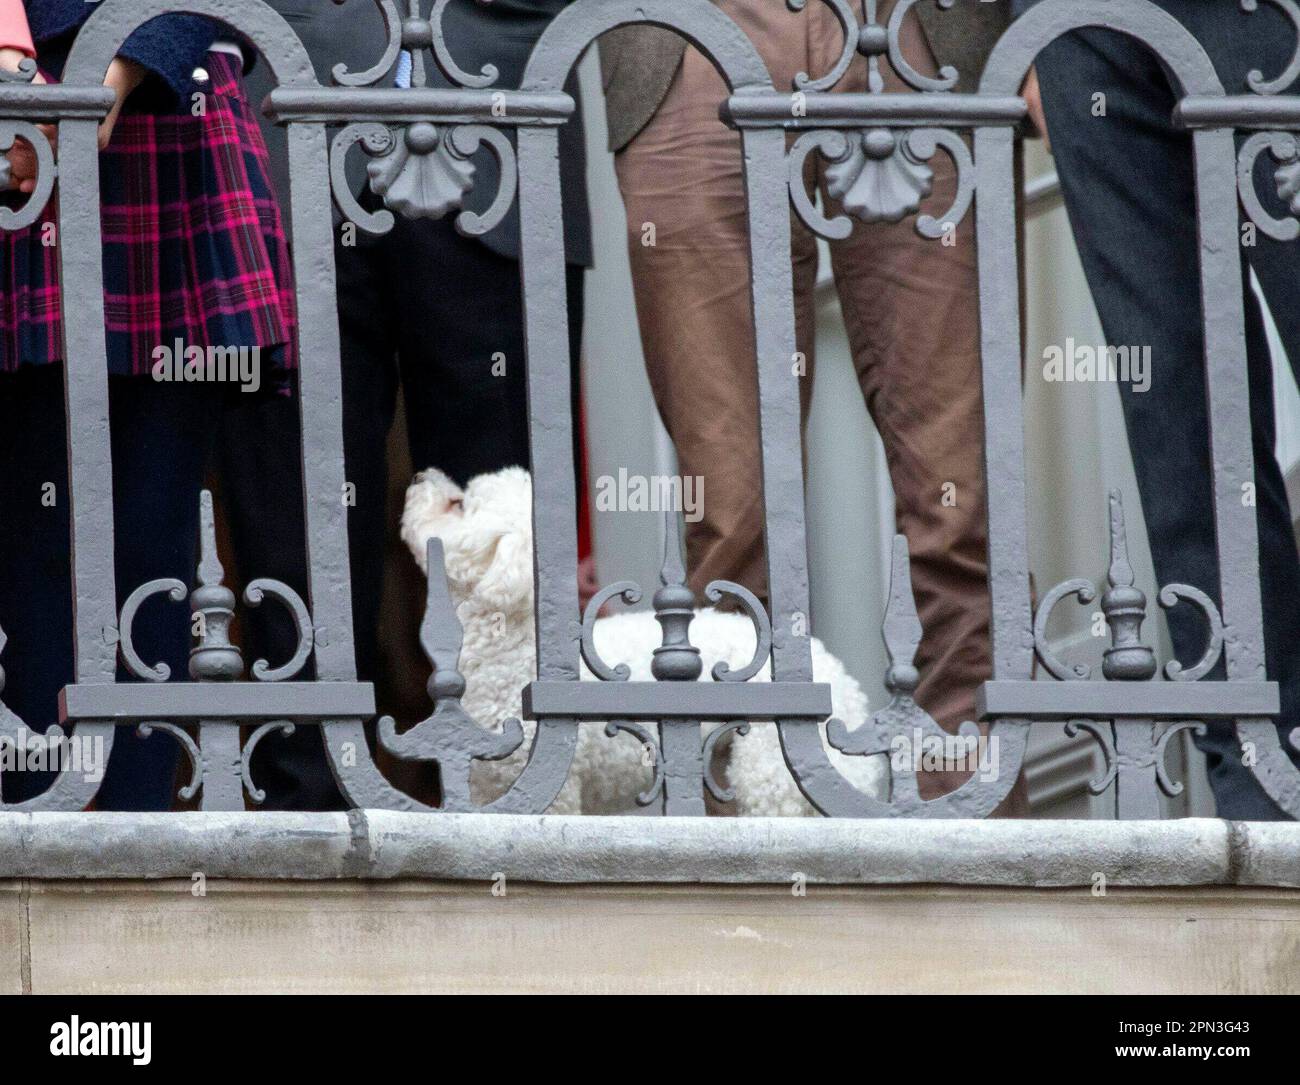 dog Cerise, a Bichon Frise at the balcony of Christian IX Palace at Amalienborg in Copenhagen, on April 16, 2023, on the occasion of Queen Margrethe 83th birthday Photo: Albert Nieboer/Netherlands OUT/Point de Vue OUT Stock Photo